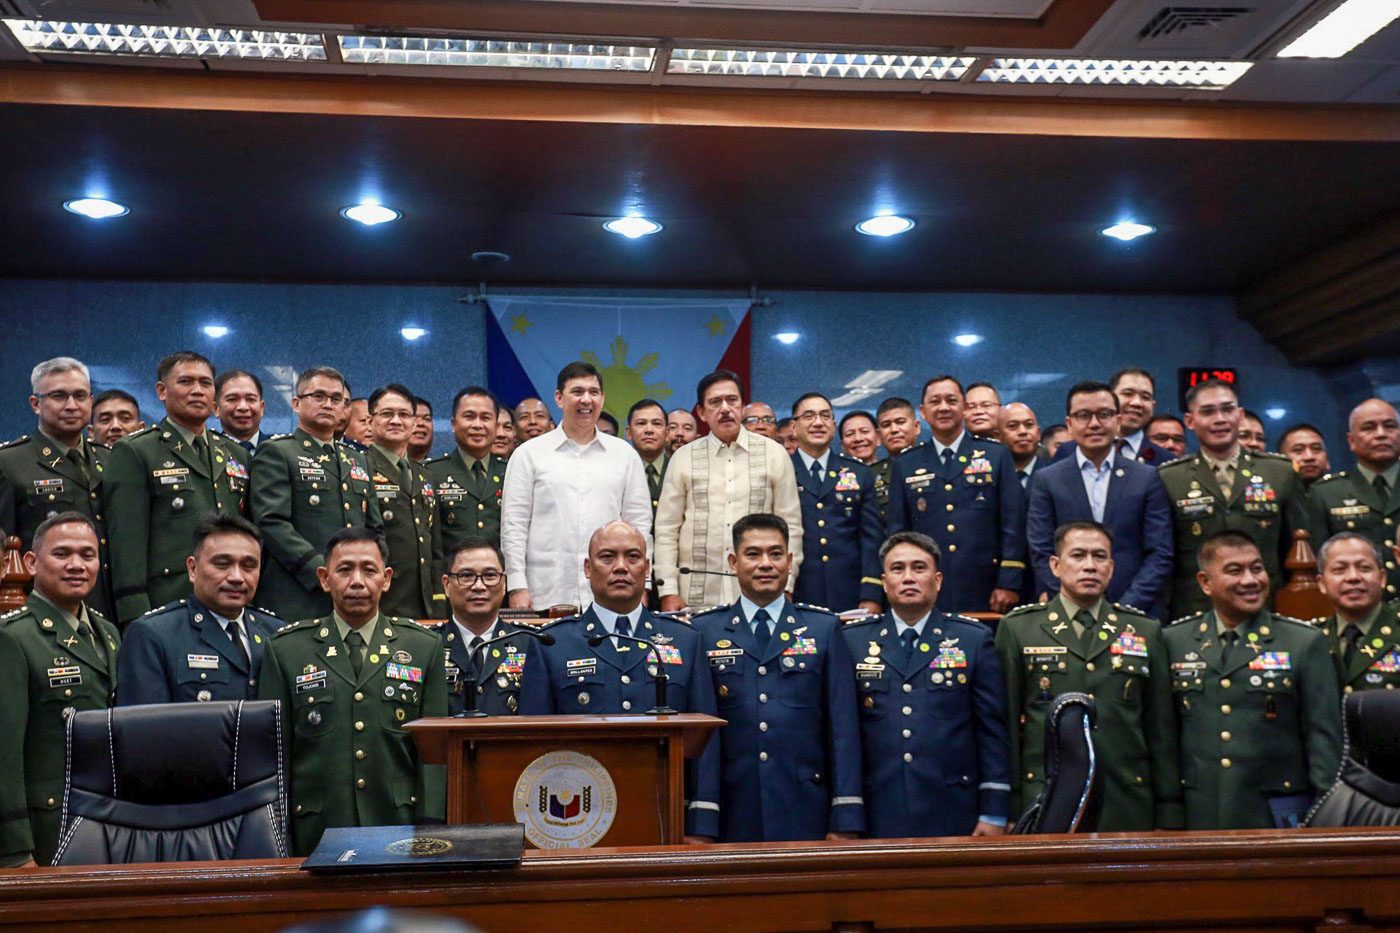 Commission on Appointments approves promotion of 74 military officers